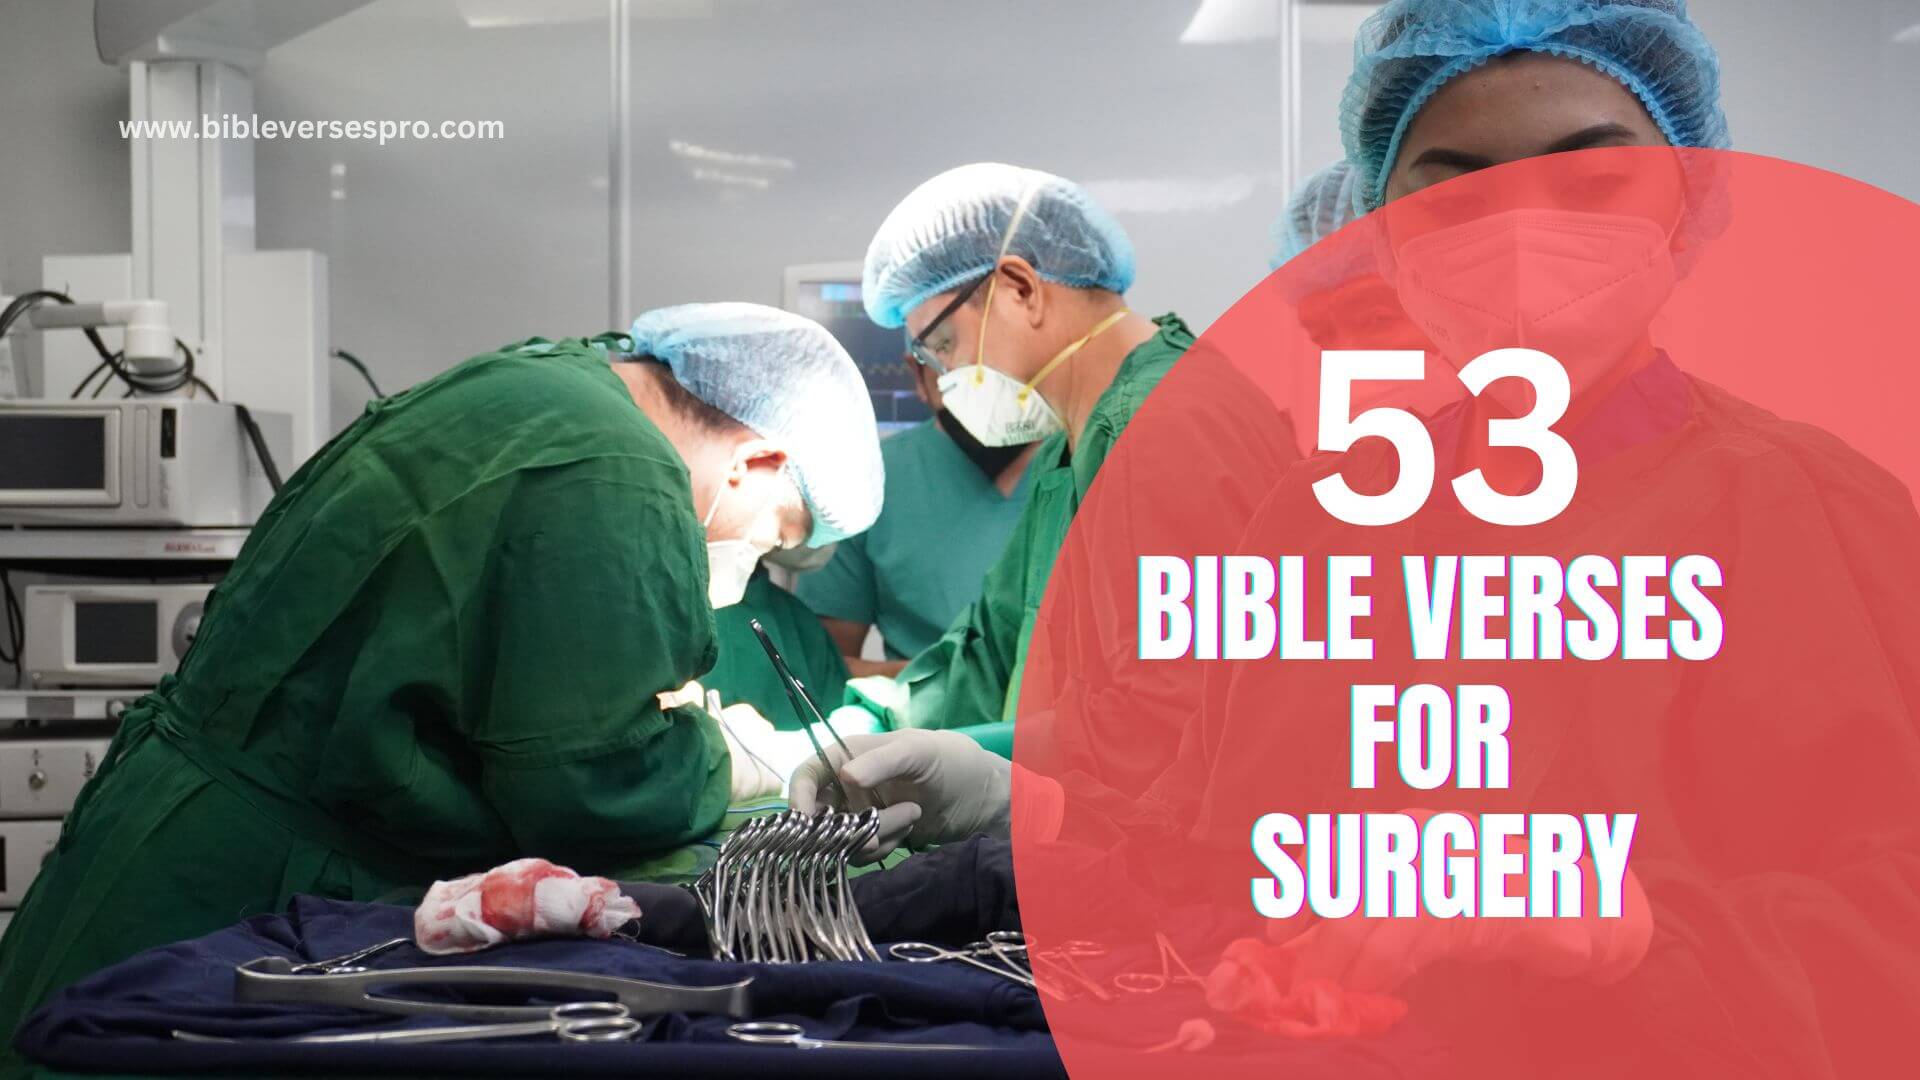 BIBLE VERSES FOR SURGERY